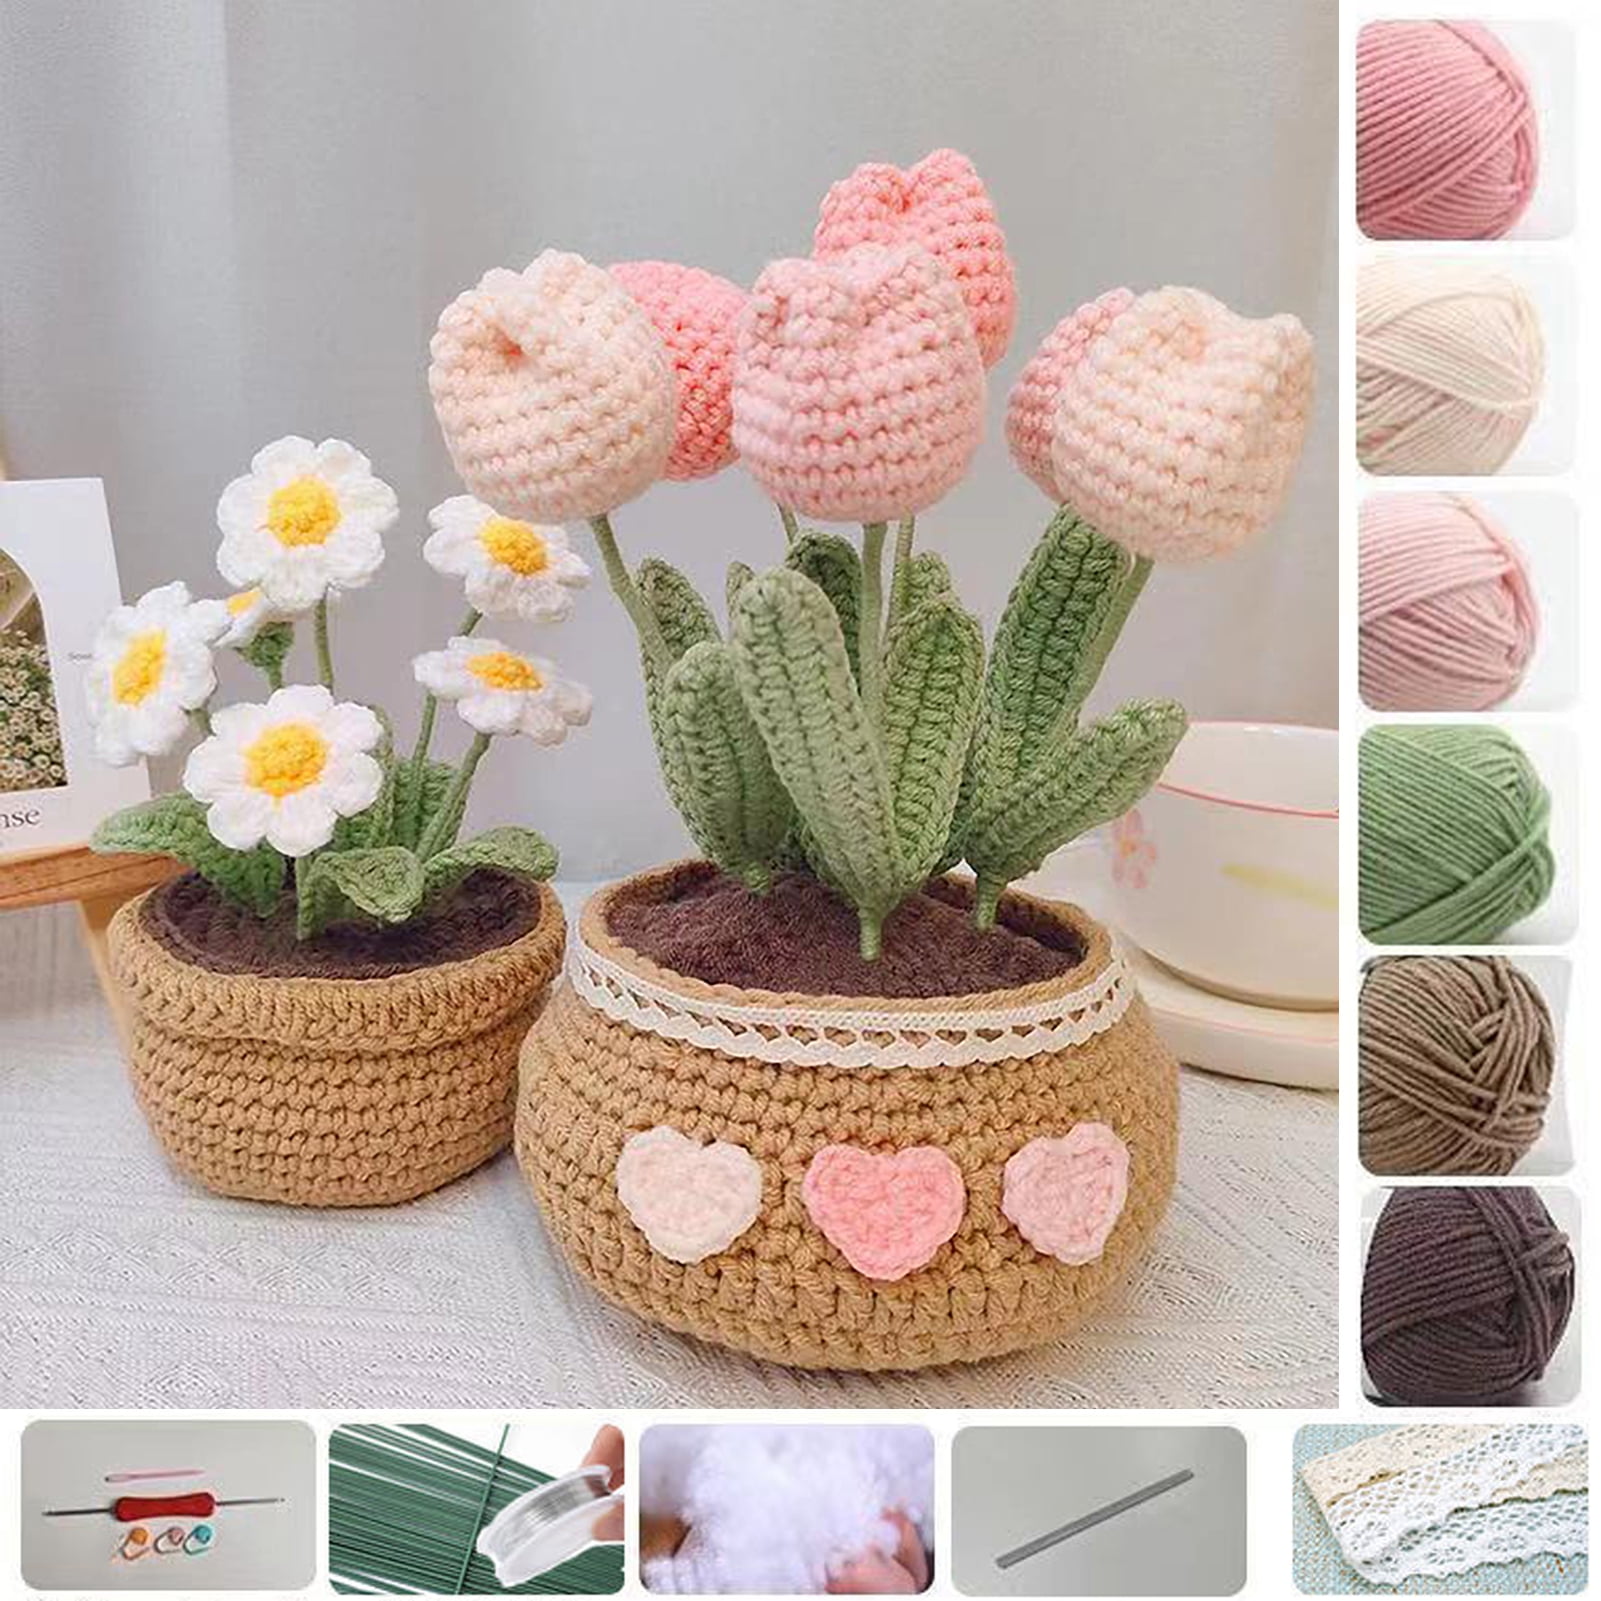 Crochet Knitting Kit for Beginners Multicolored Potted Tulip Step